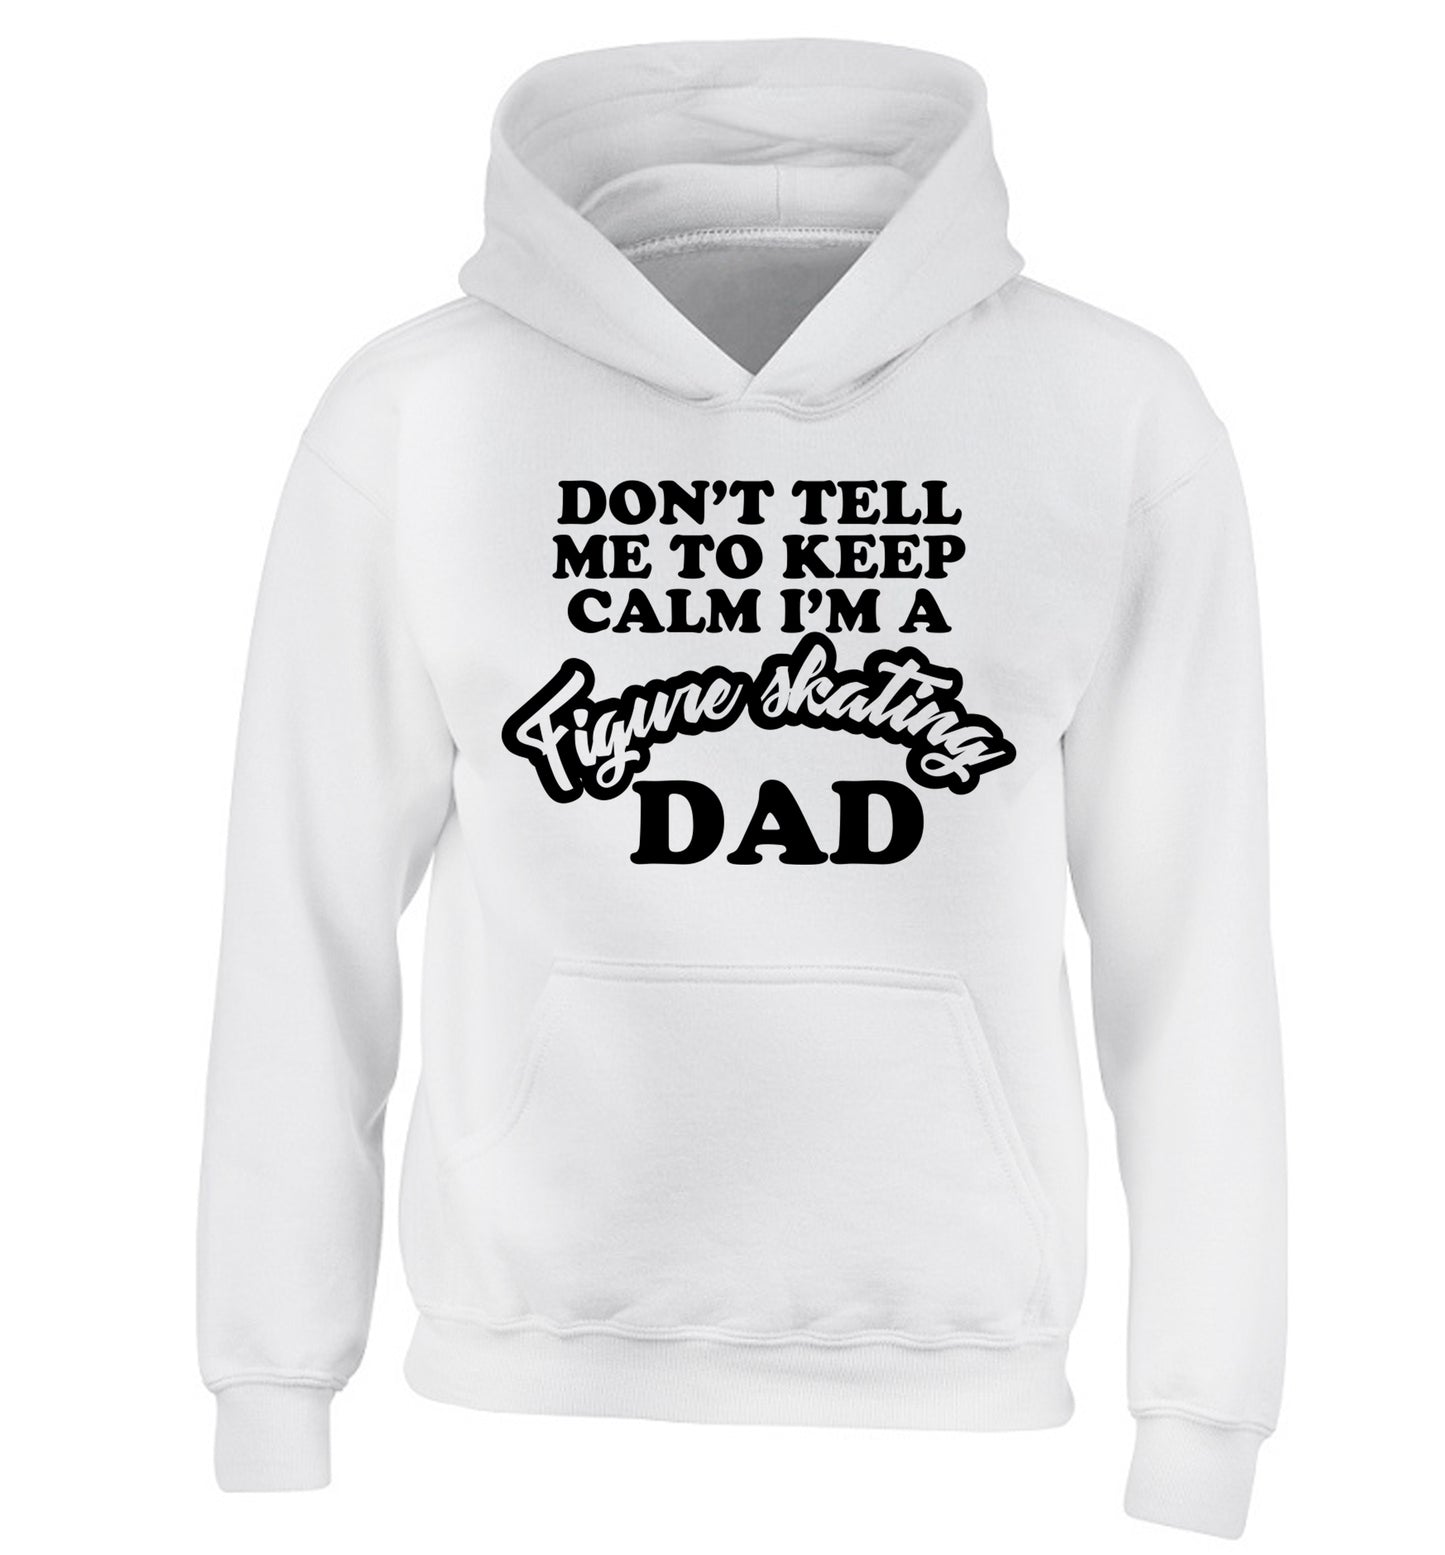 Don't tell me to keep calm I'm a figure skating dad children's white hoodie 12-14 Years